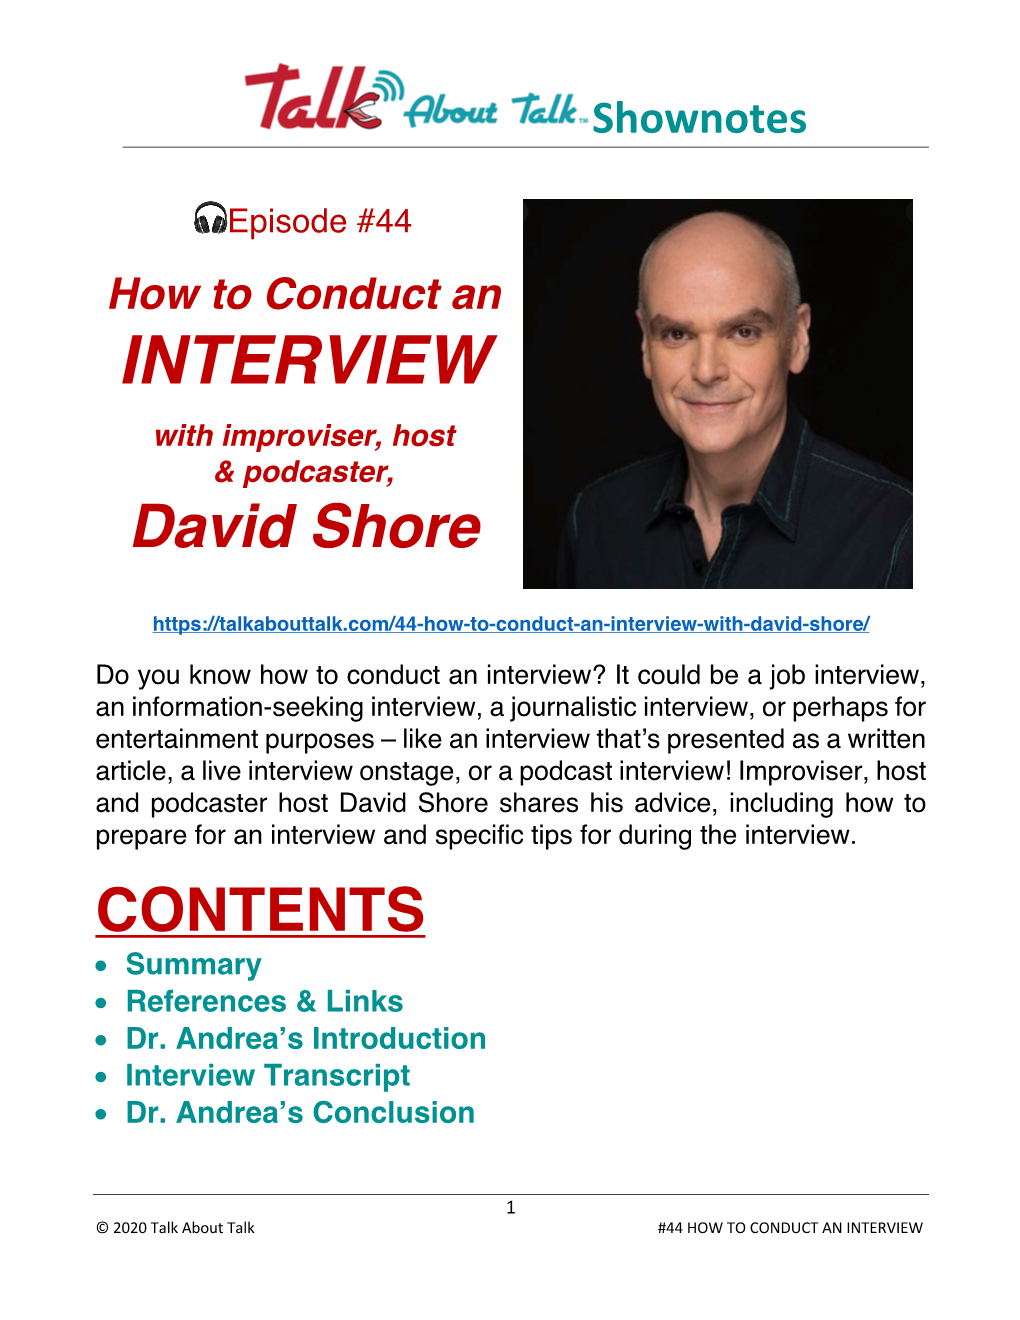 Shownotes #44 HOW to CONDUCT an INTERVIEW with David Shore